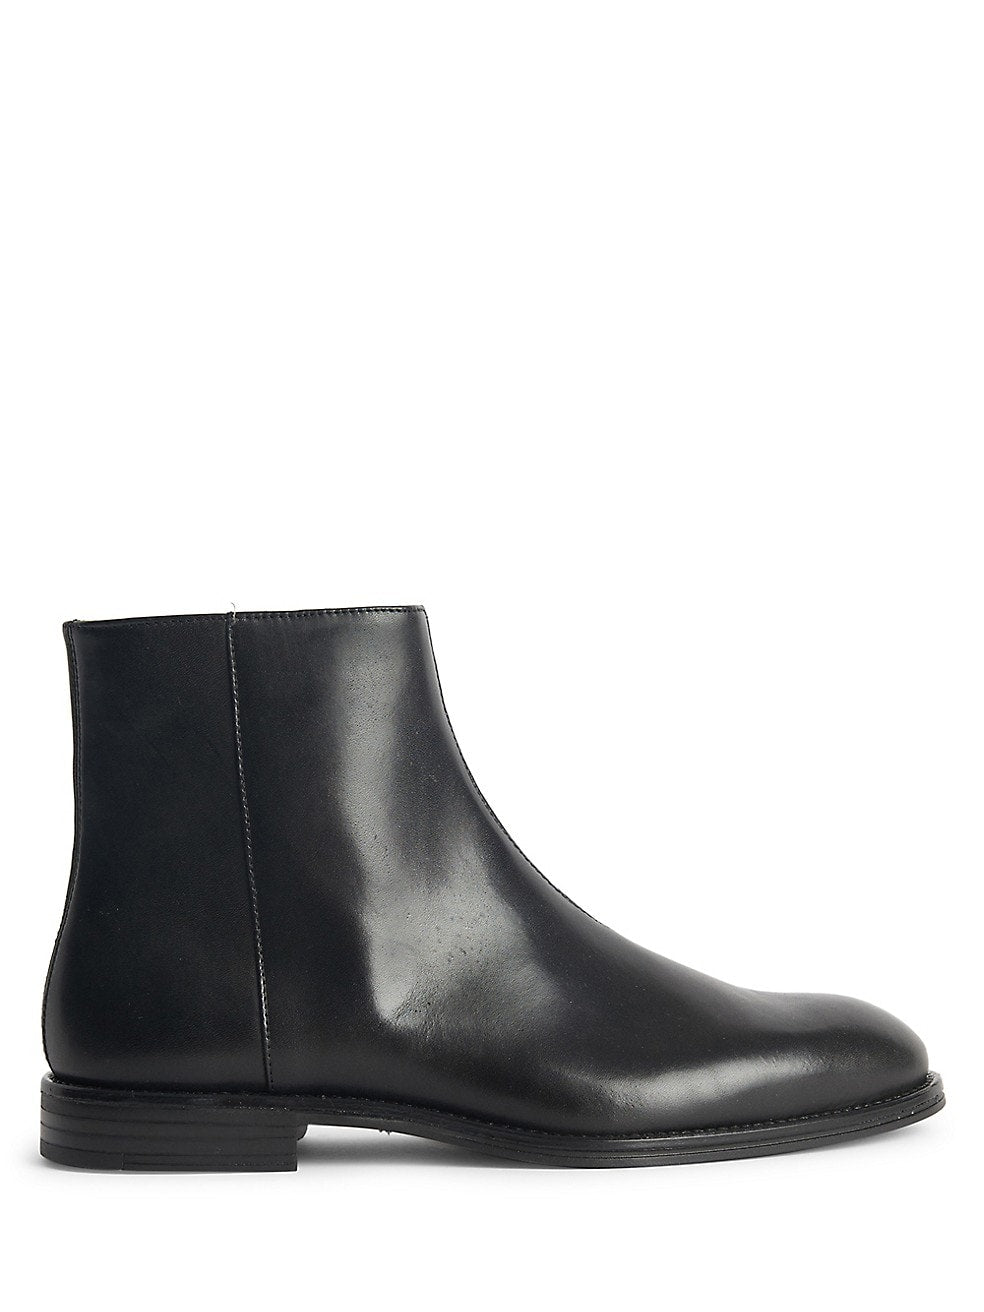 Mack Boots in Black